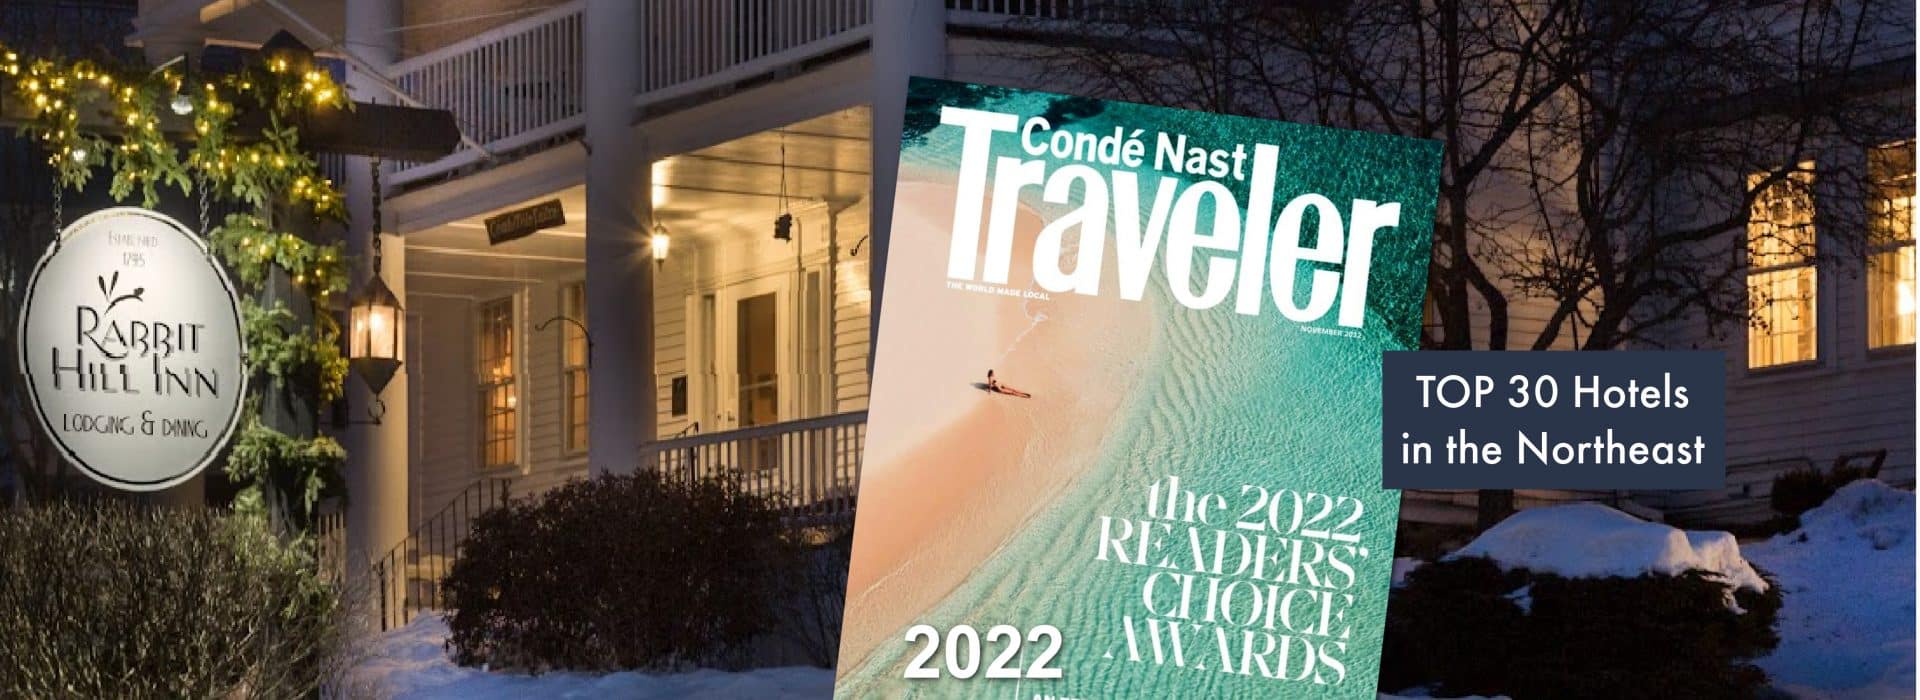 Conde Nast magazine cover November 2022 issue featuring Readers Choice Awards